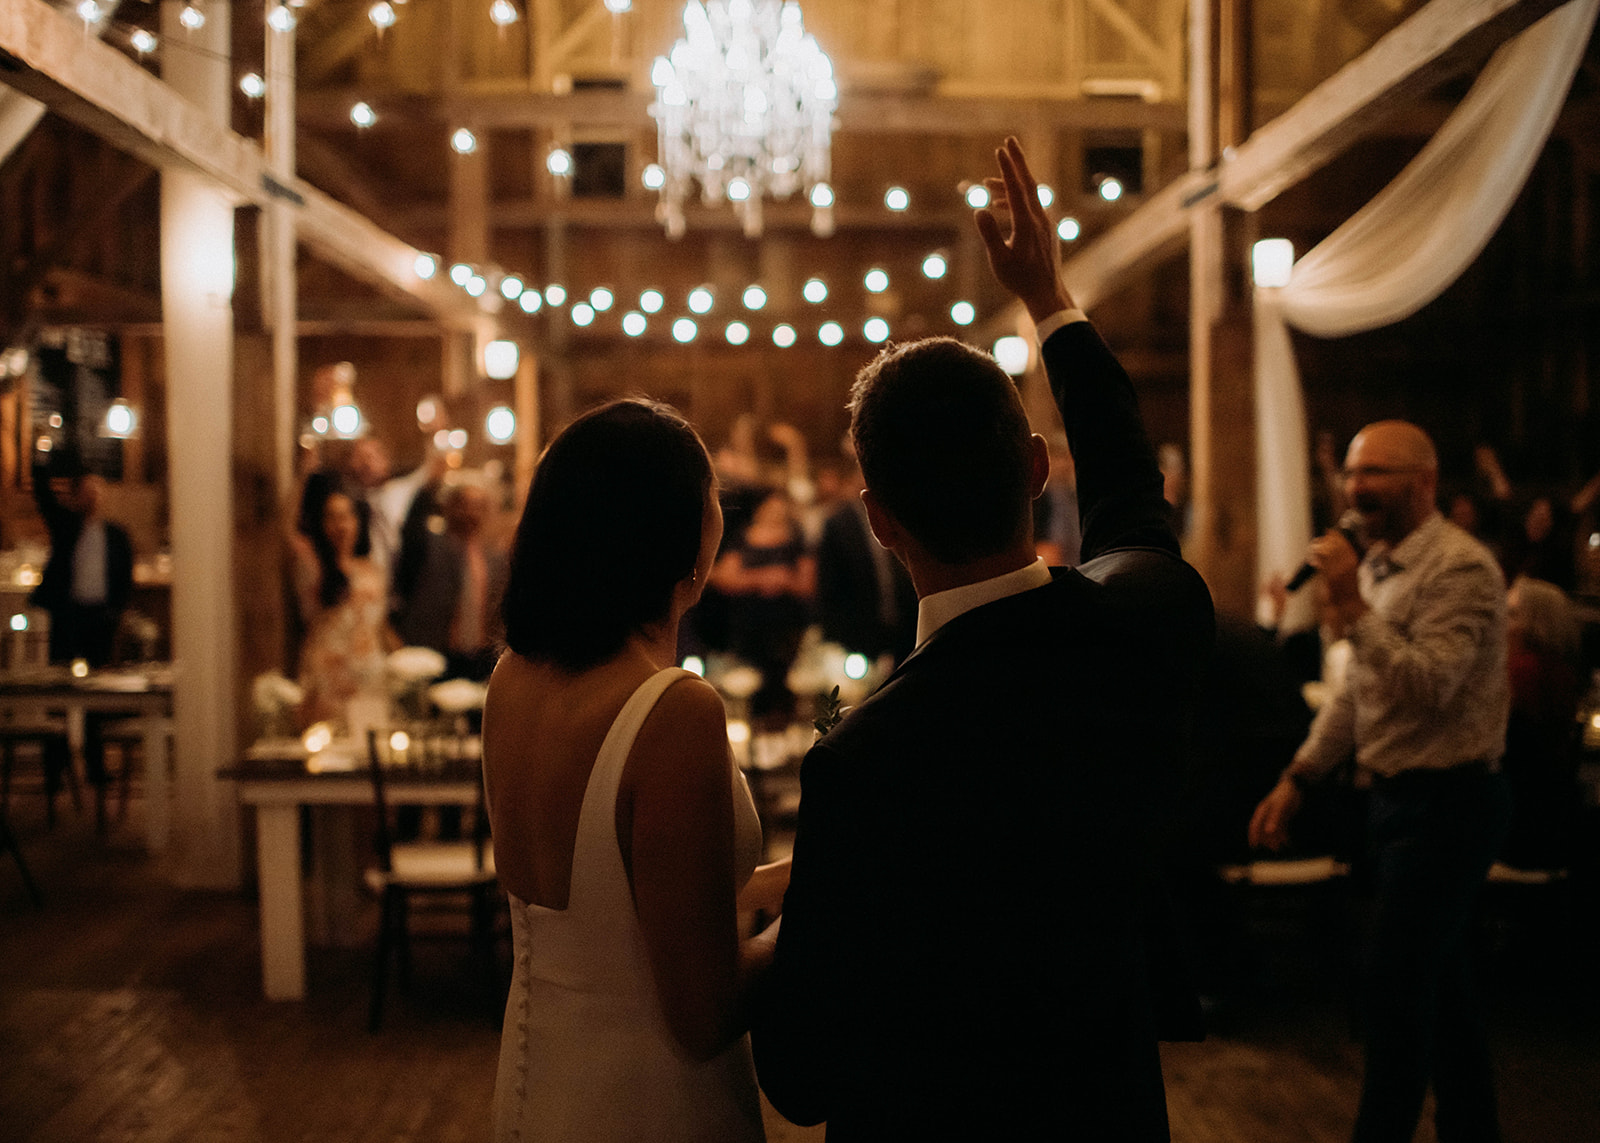 a newly married couple stand holding hands with their backs to the camera looking towards their wedding guests and the man's arm is raised and waving.